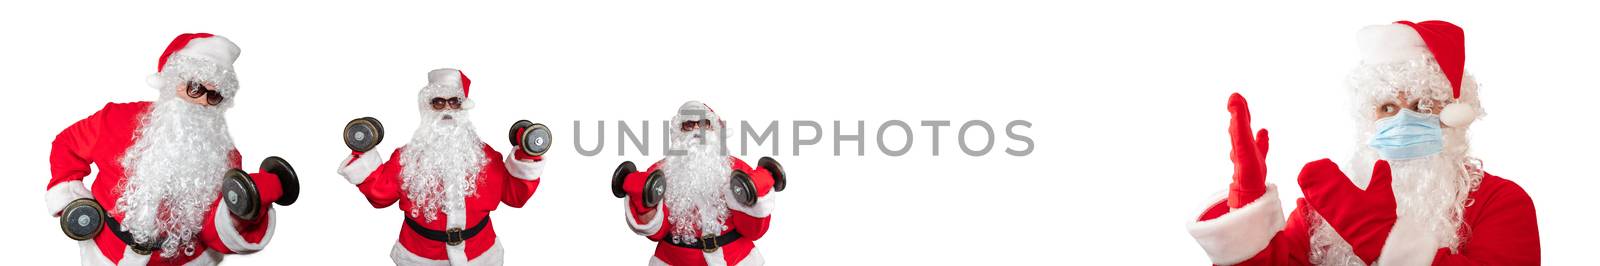 Santa Claus wearing a medical mask pointing at other Santa Clauses working out and doing bicep curls. Isolated on white background. Sport, fitness, medical conept. Banner size, copy space.